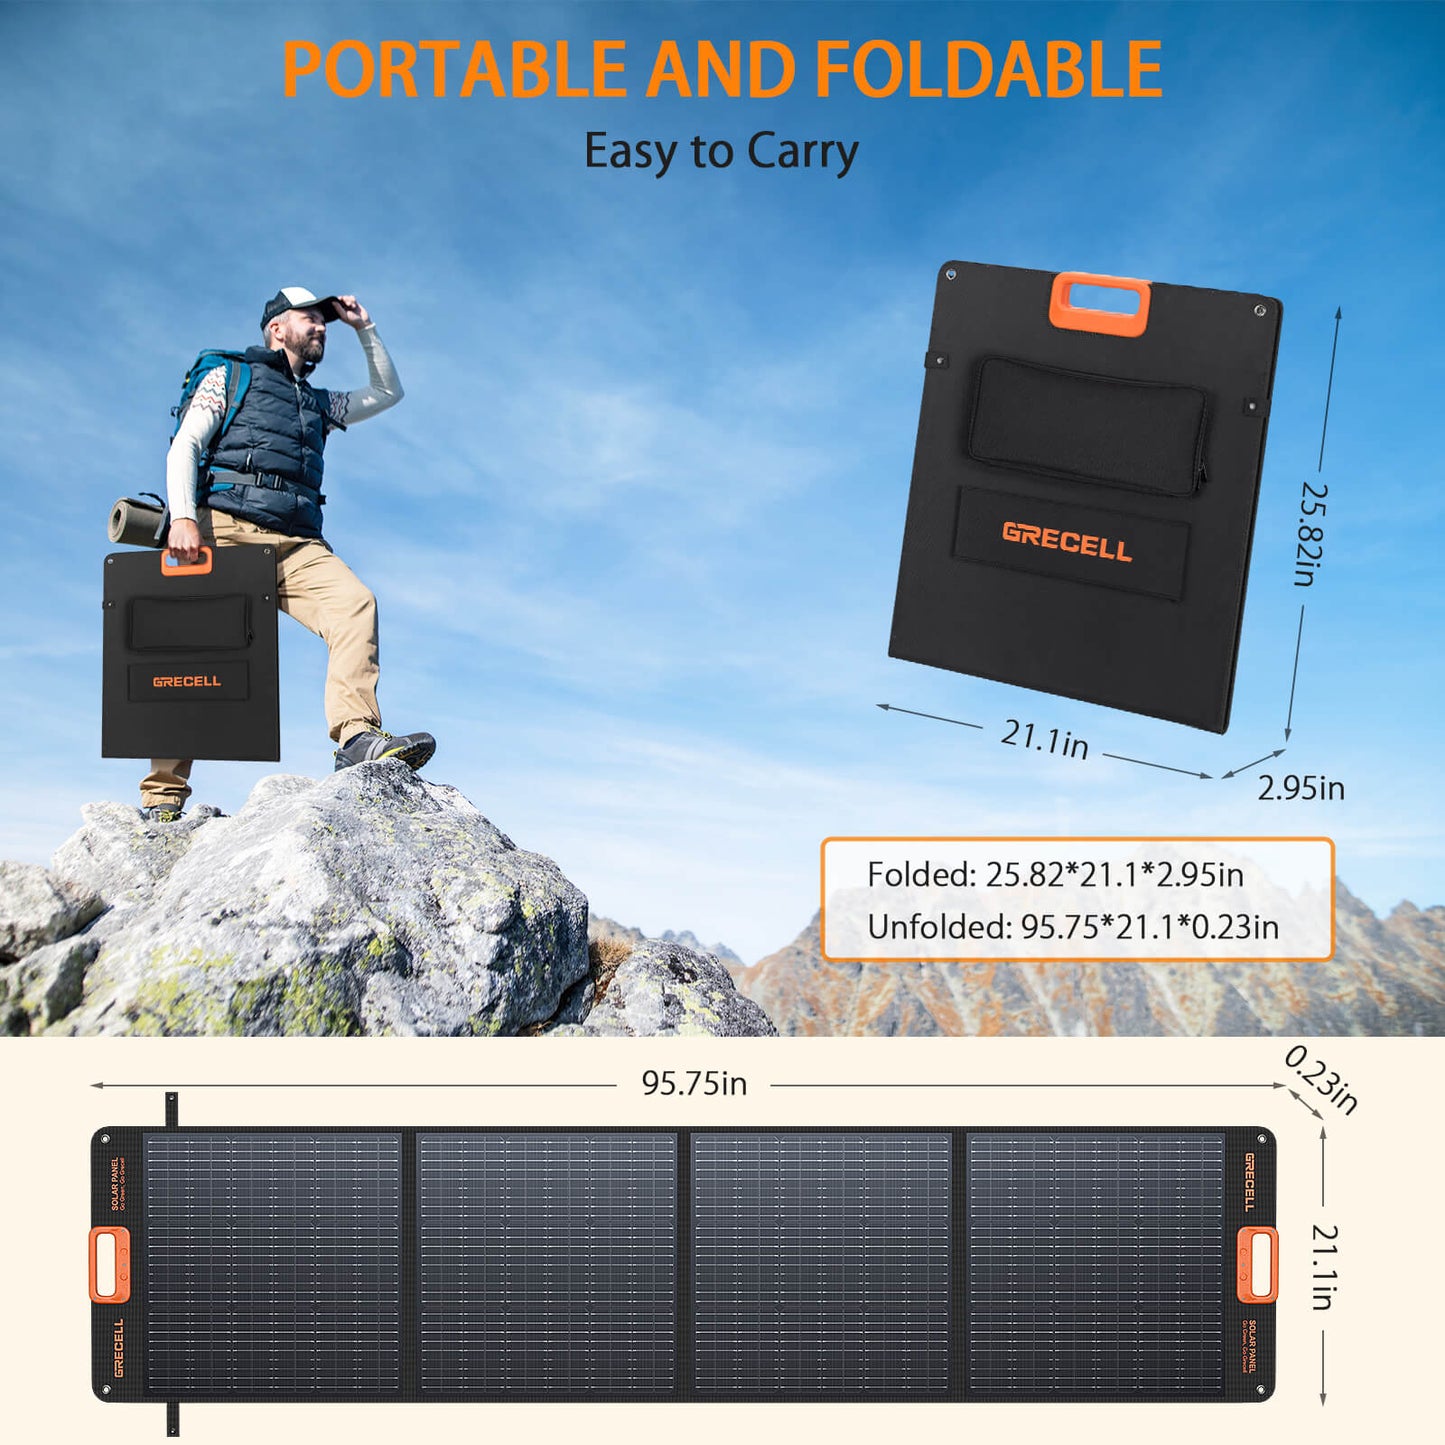 GRECELL 200W Portable Solar Panel is Portable and Foldable